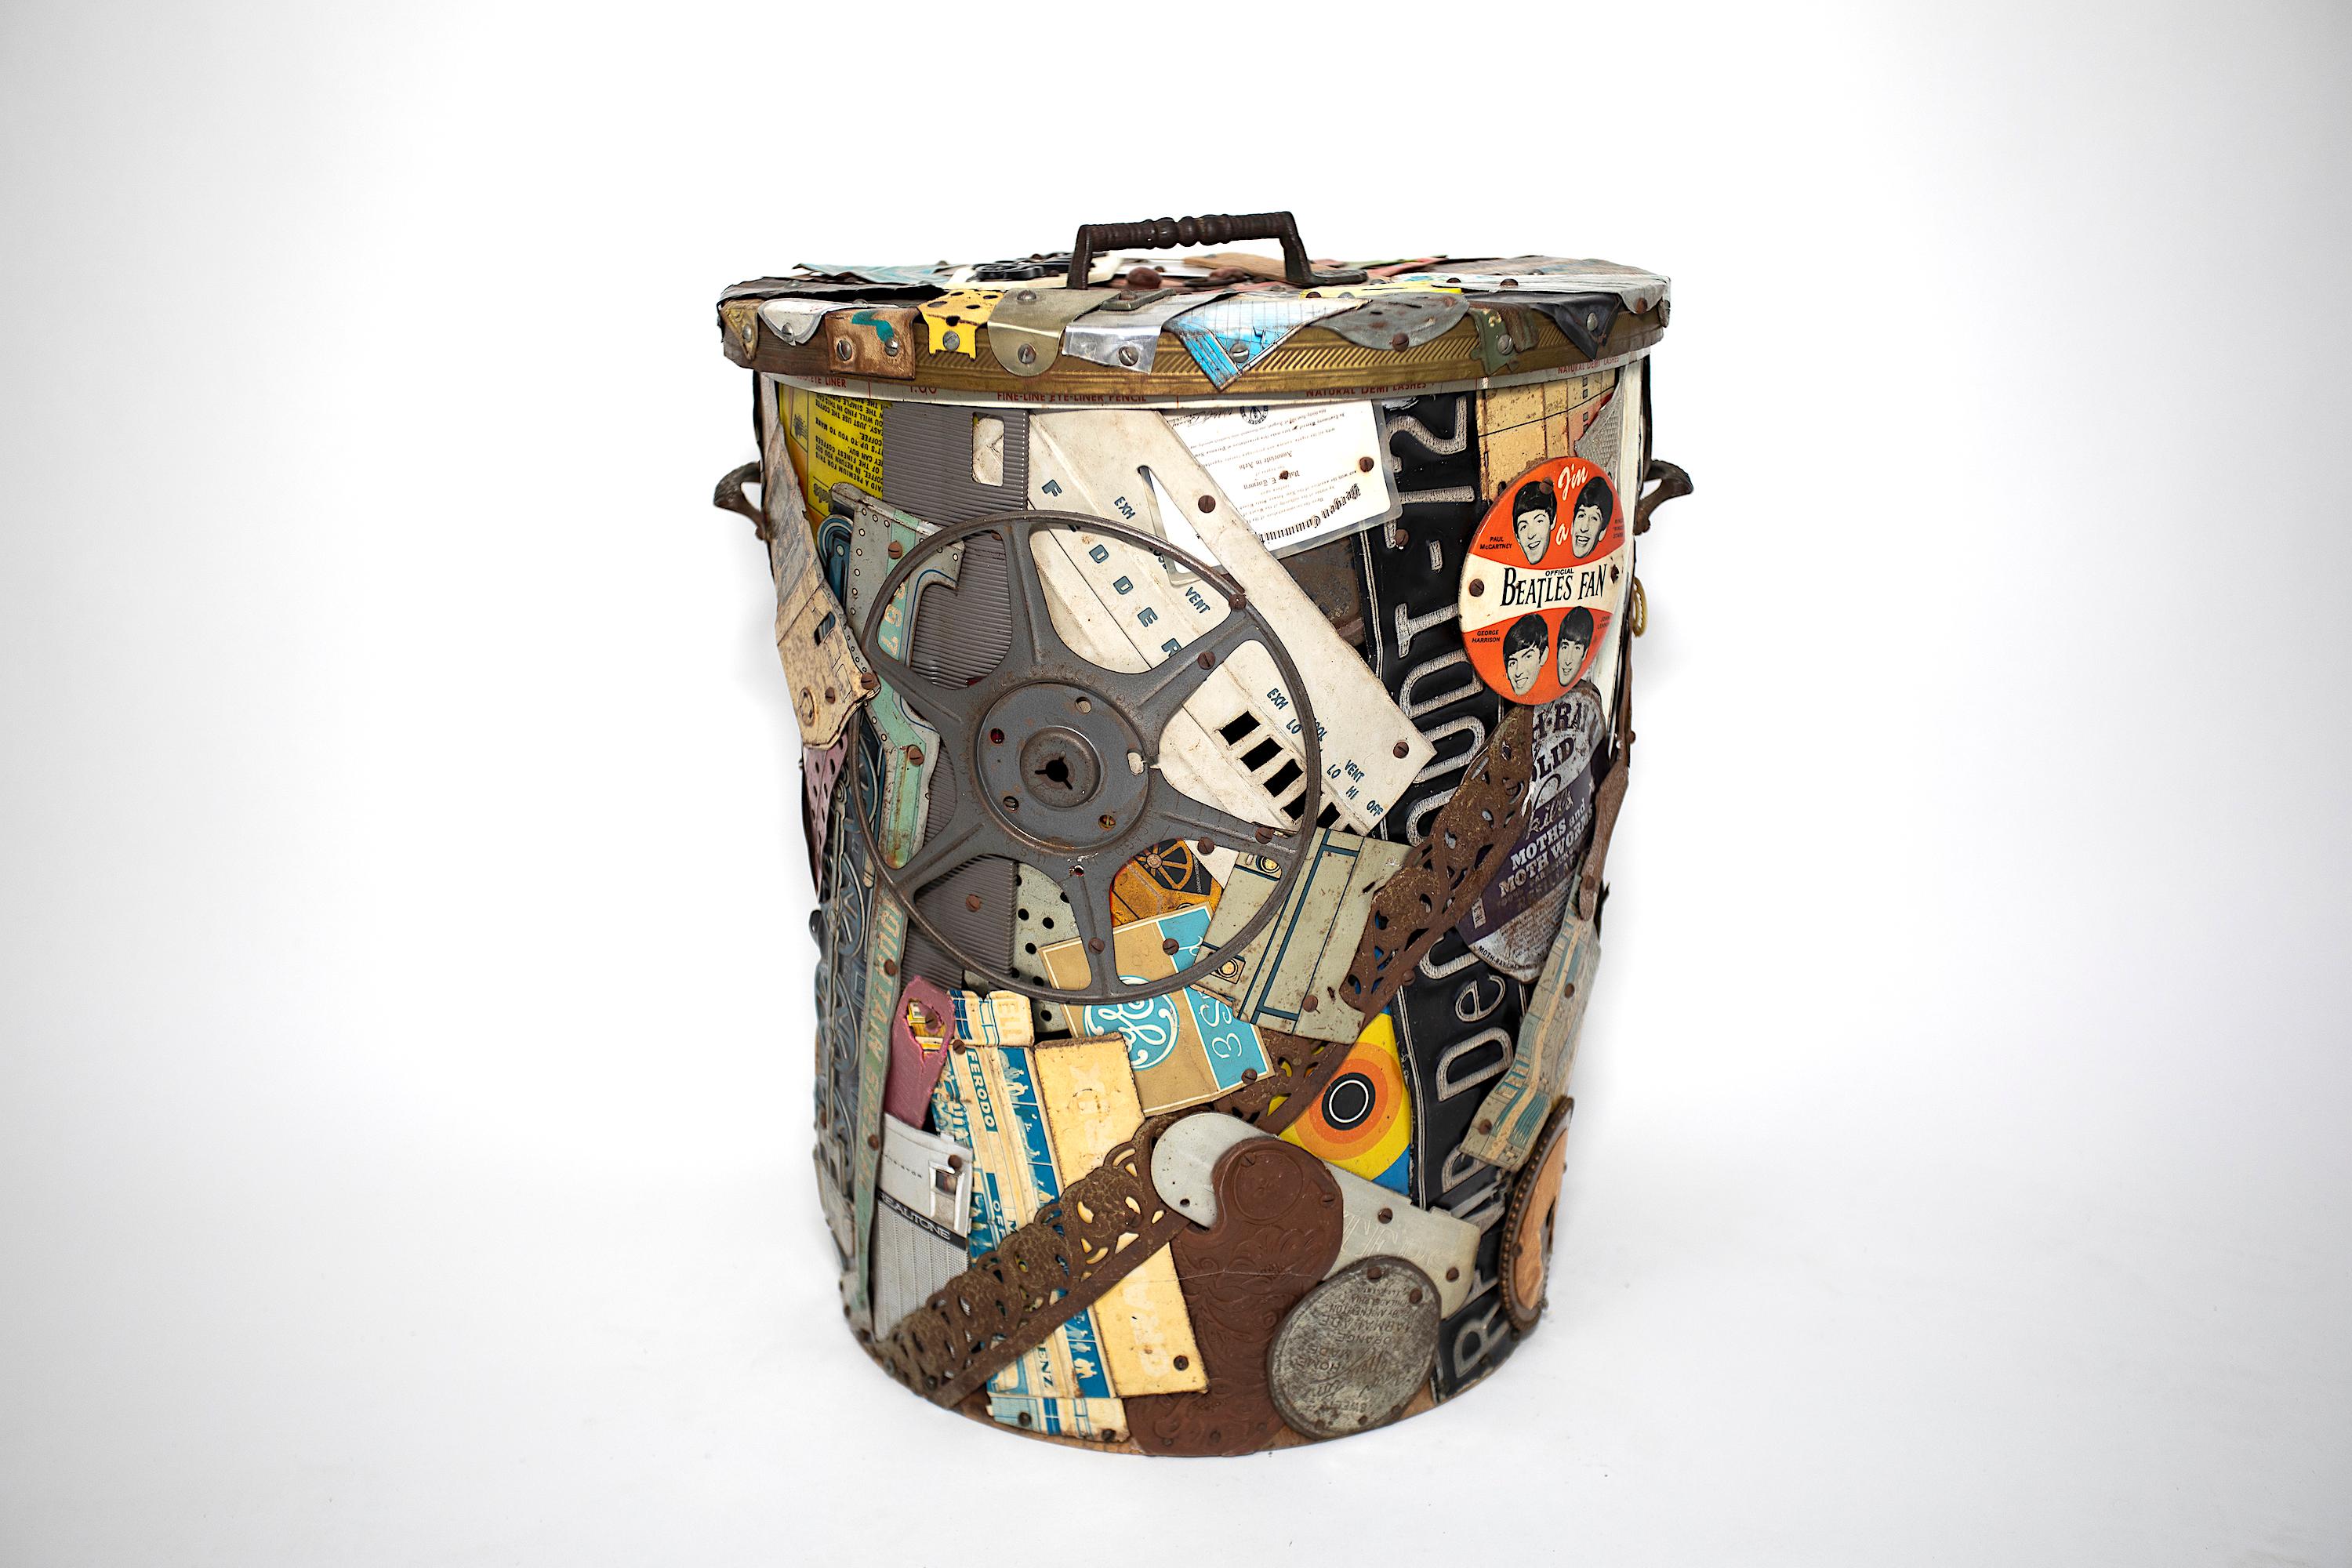 Leo Sewell Trash Can.
Made of an accumulation of found objects
Signed and Dated on the bottom.